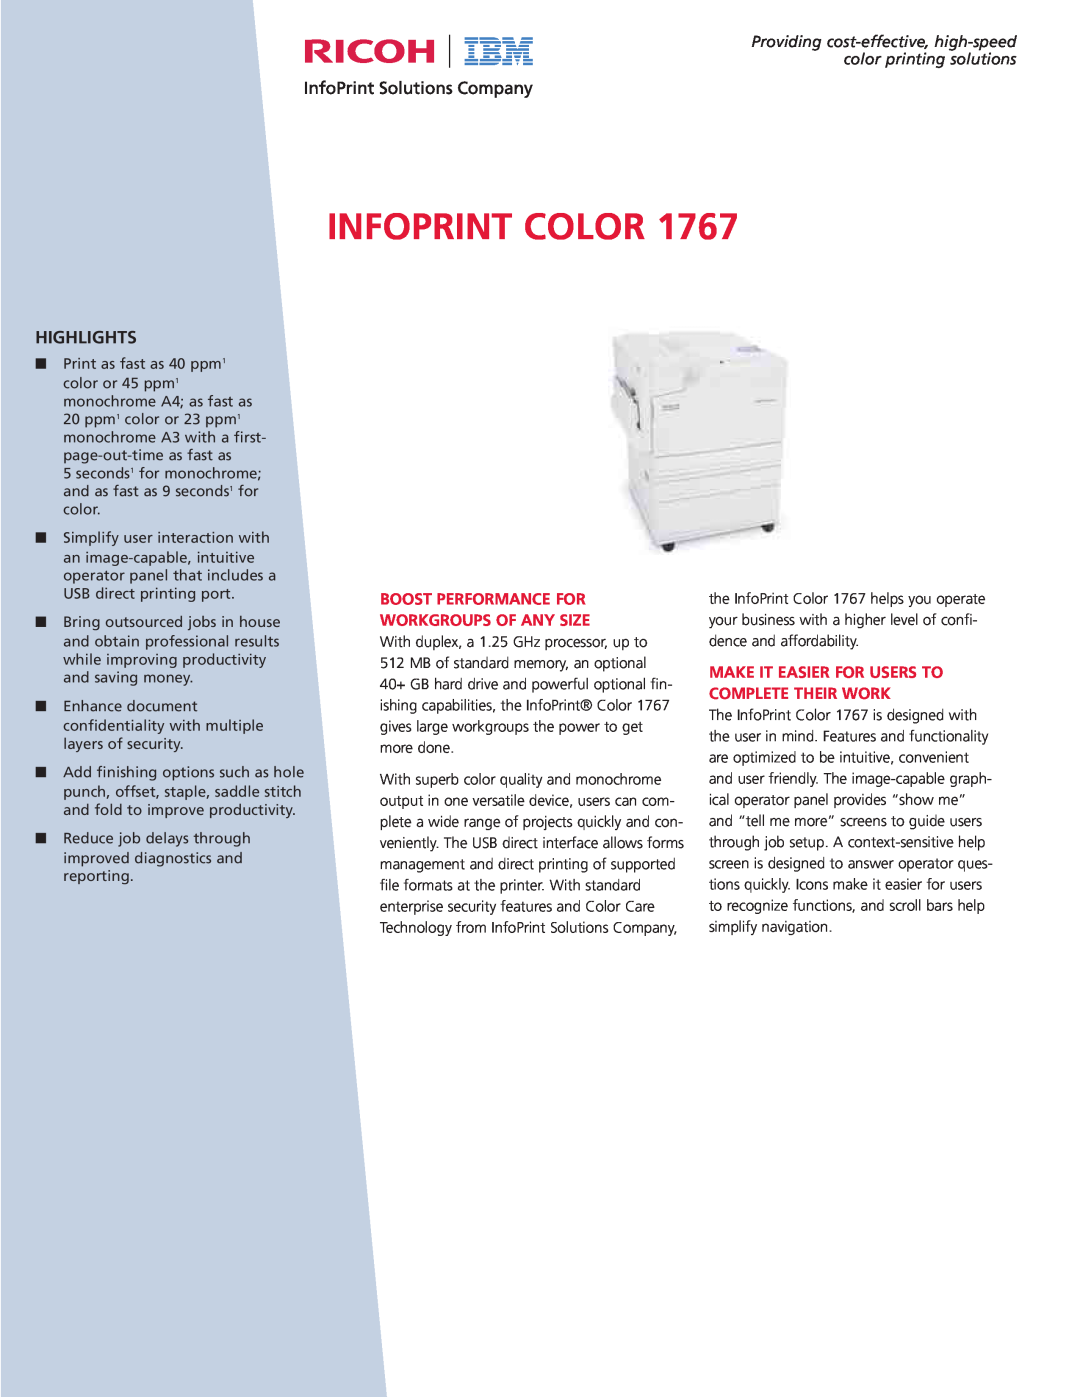 IBM Ricoh COLOR 1767 manual Boost Performance For Workgroups Of Any Size, Make It Easier For Users To Complete Their Work 